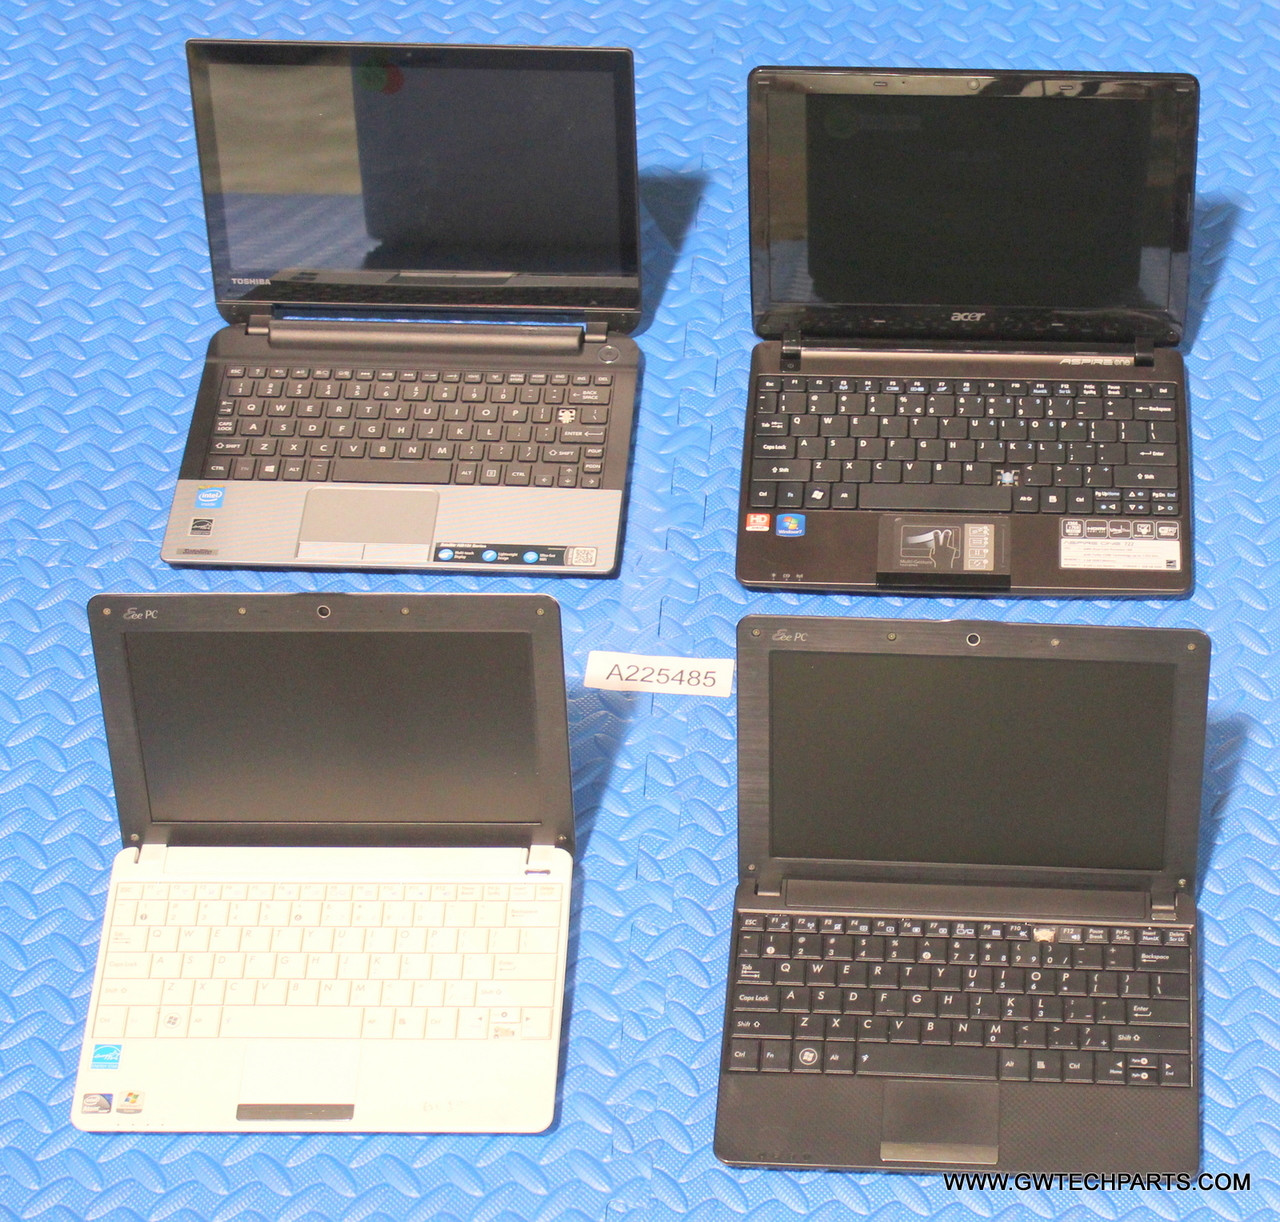 174X NETBOOK LAPTOPS MIXED BRANDS MISSING PARTS FUNCTION ISSUES